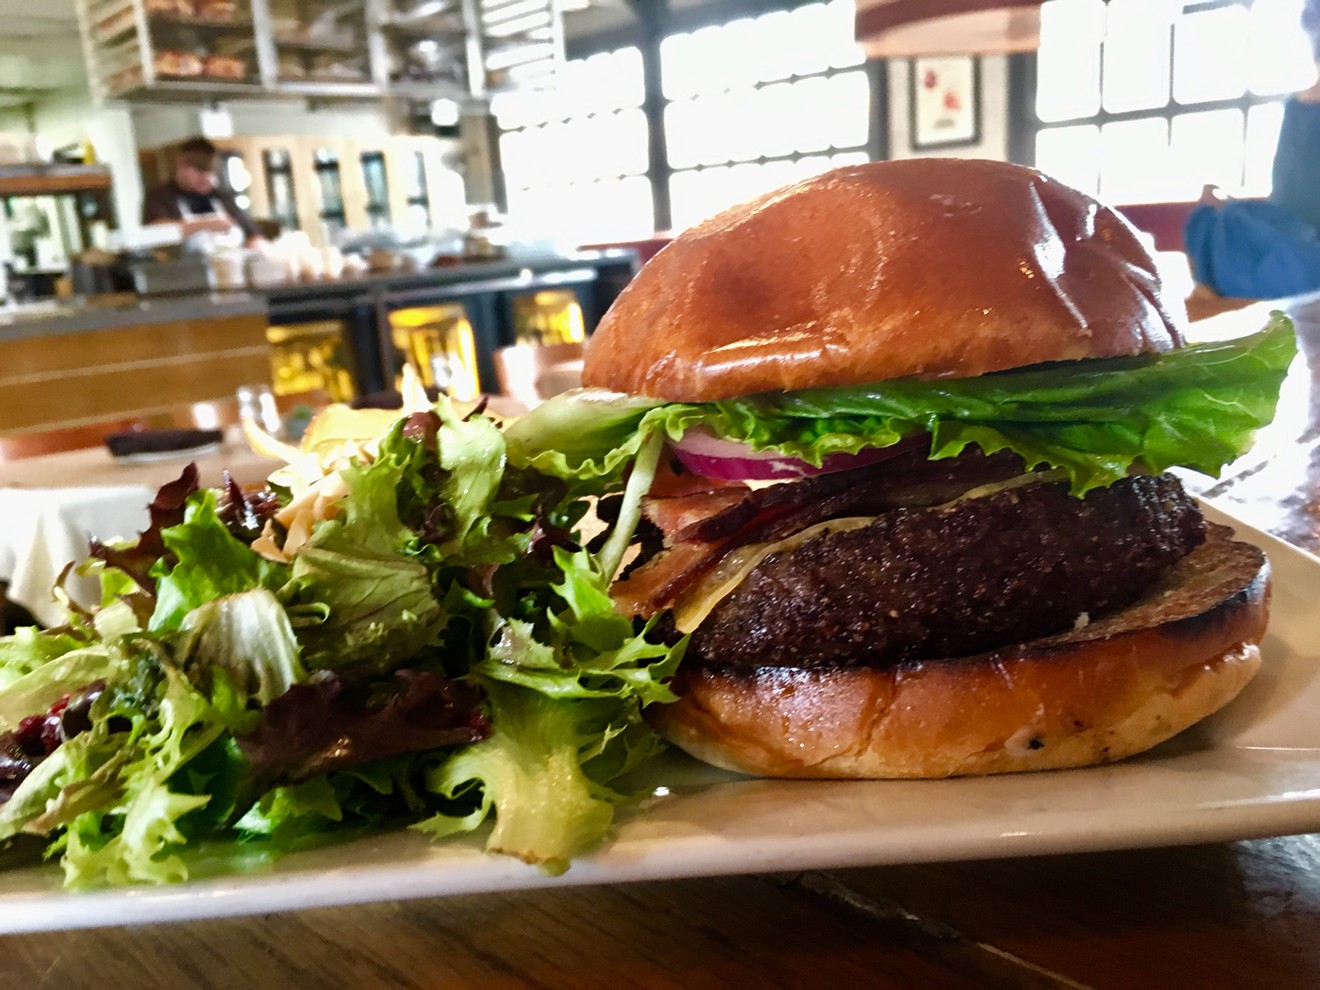 Bolsa is still open and still selling its burger with a patty ground in-house.